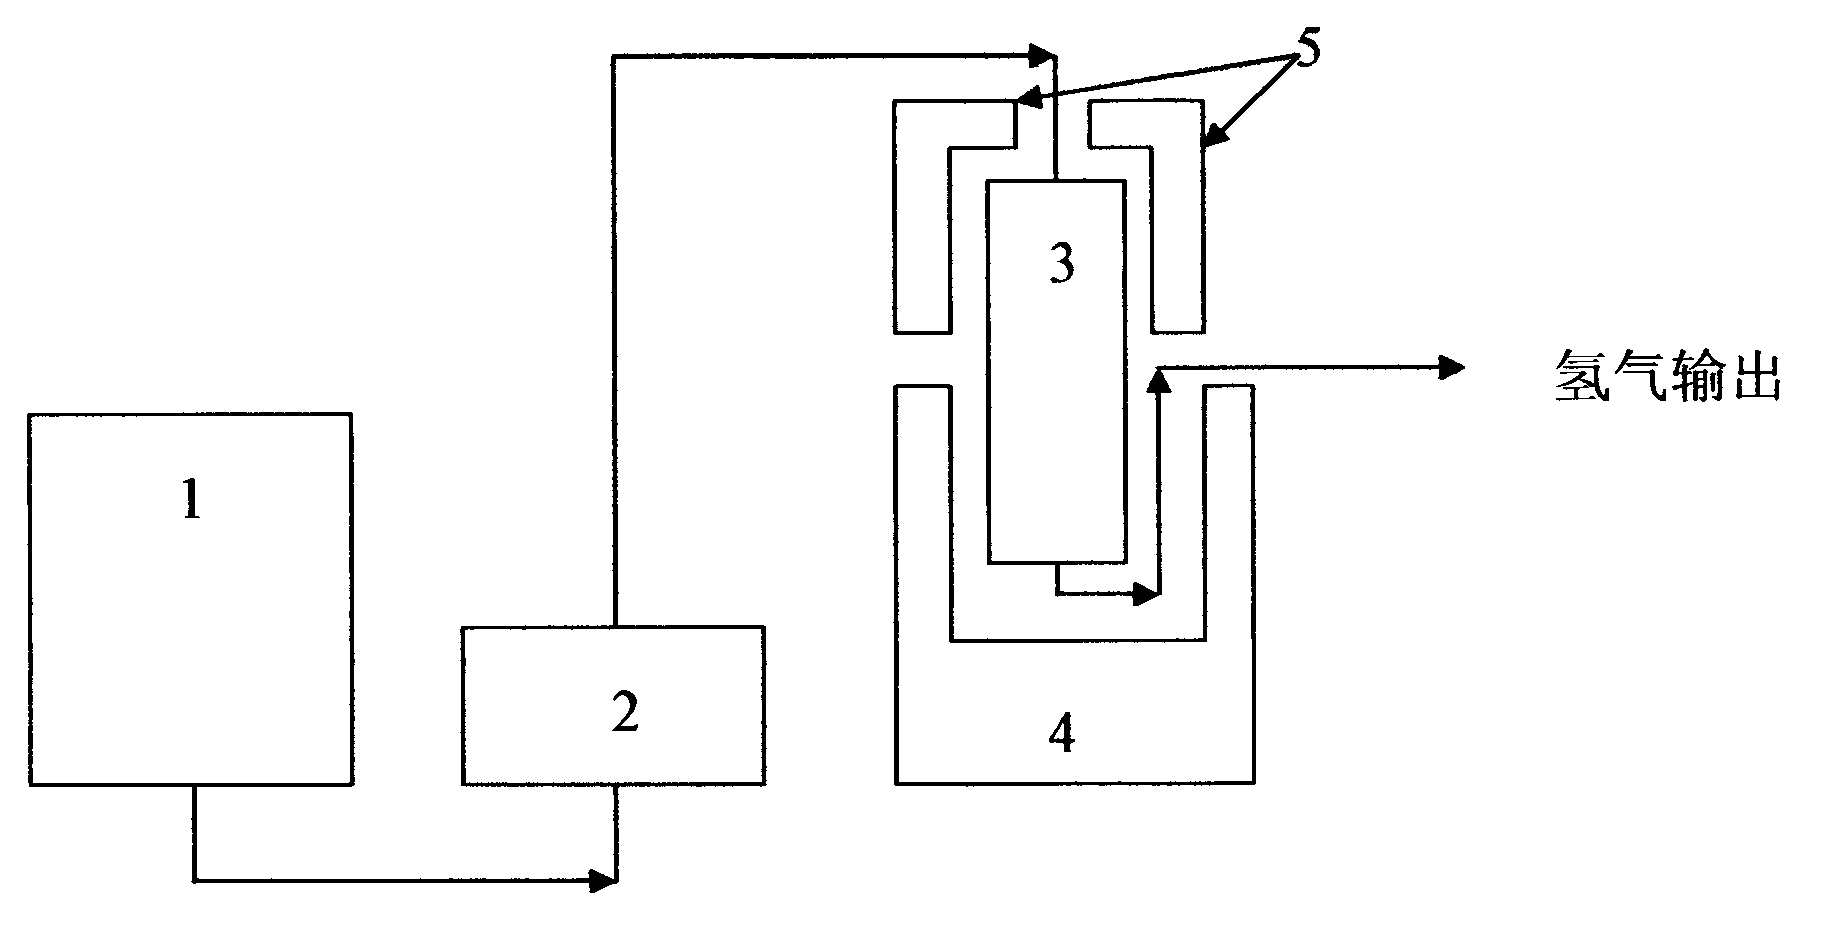 Silicon powder composition, method, reactor and device for producing hydrogen